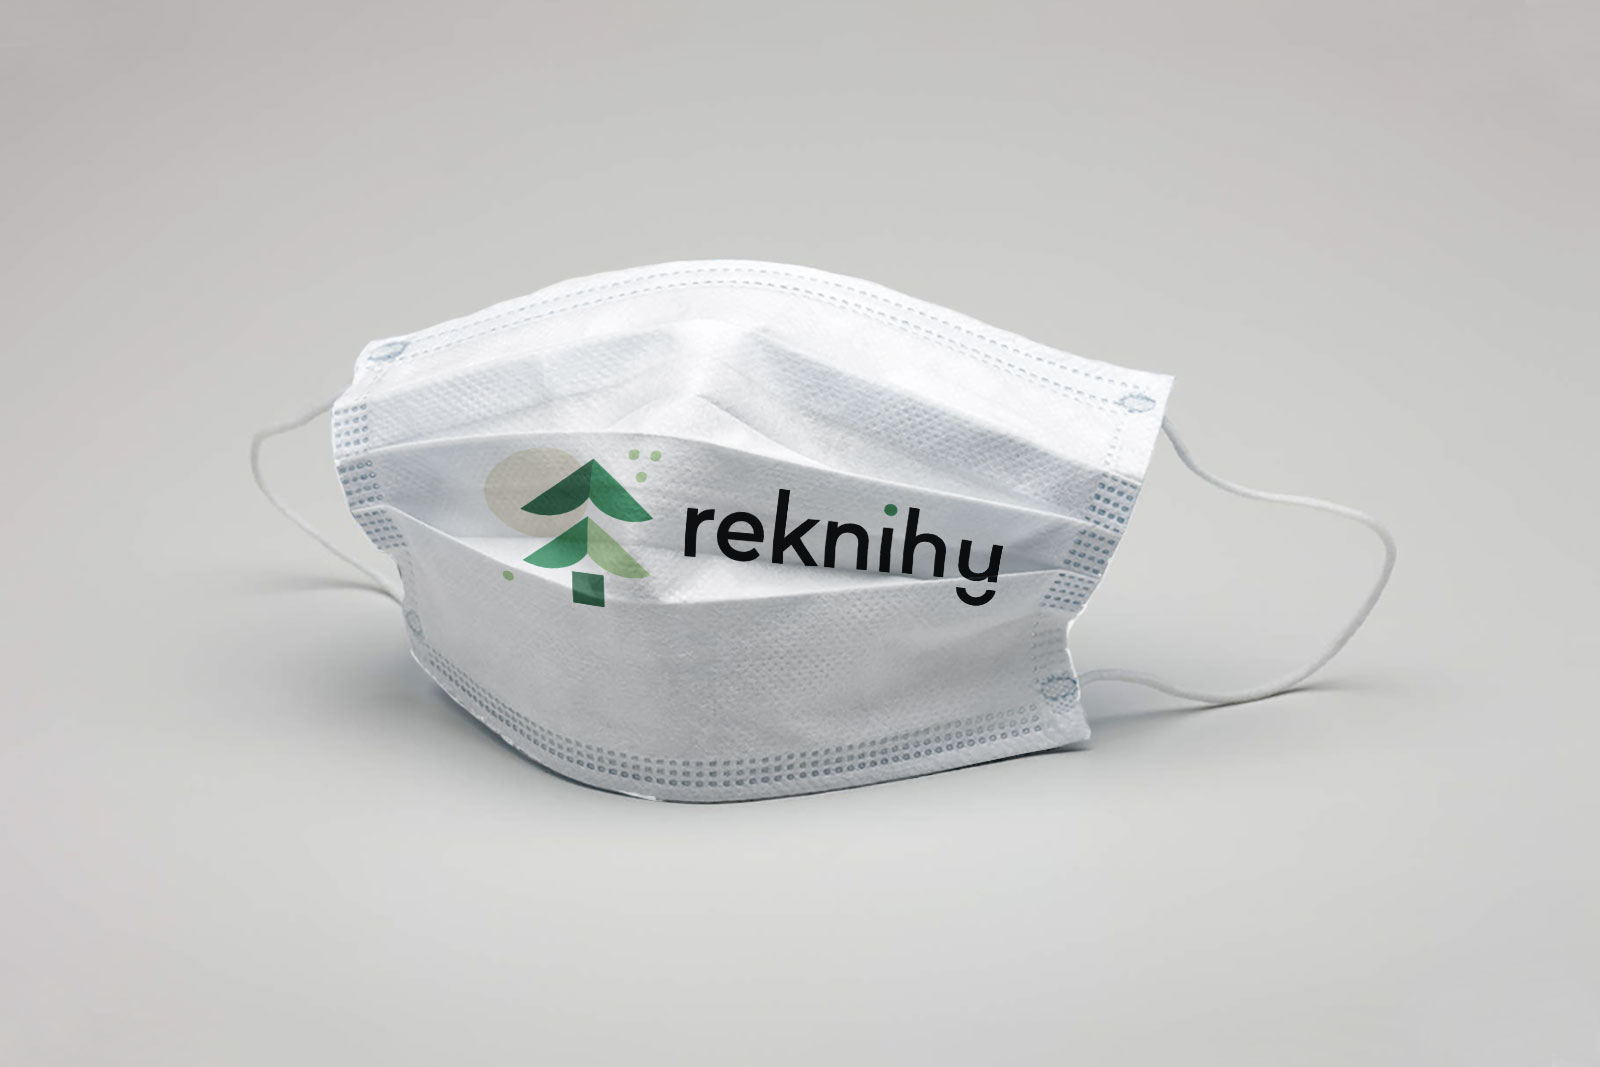 Reknihy promotional materials